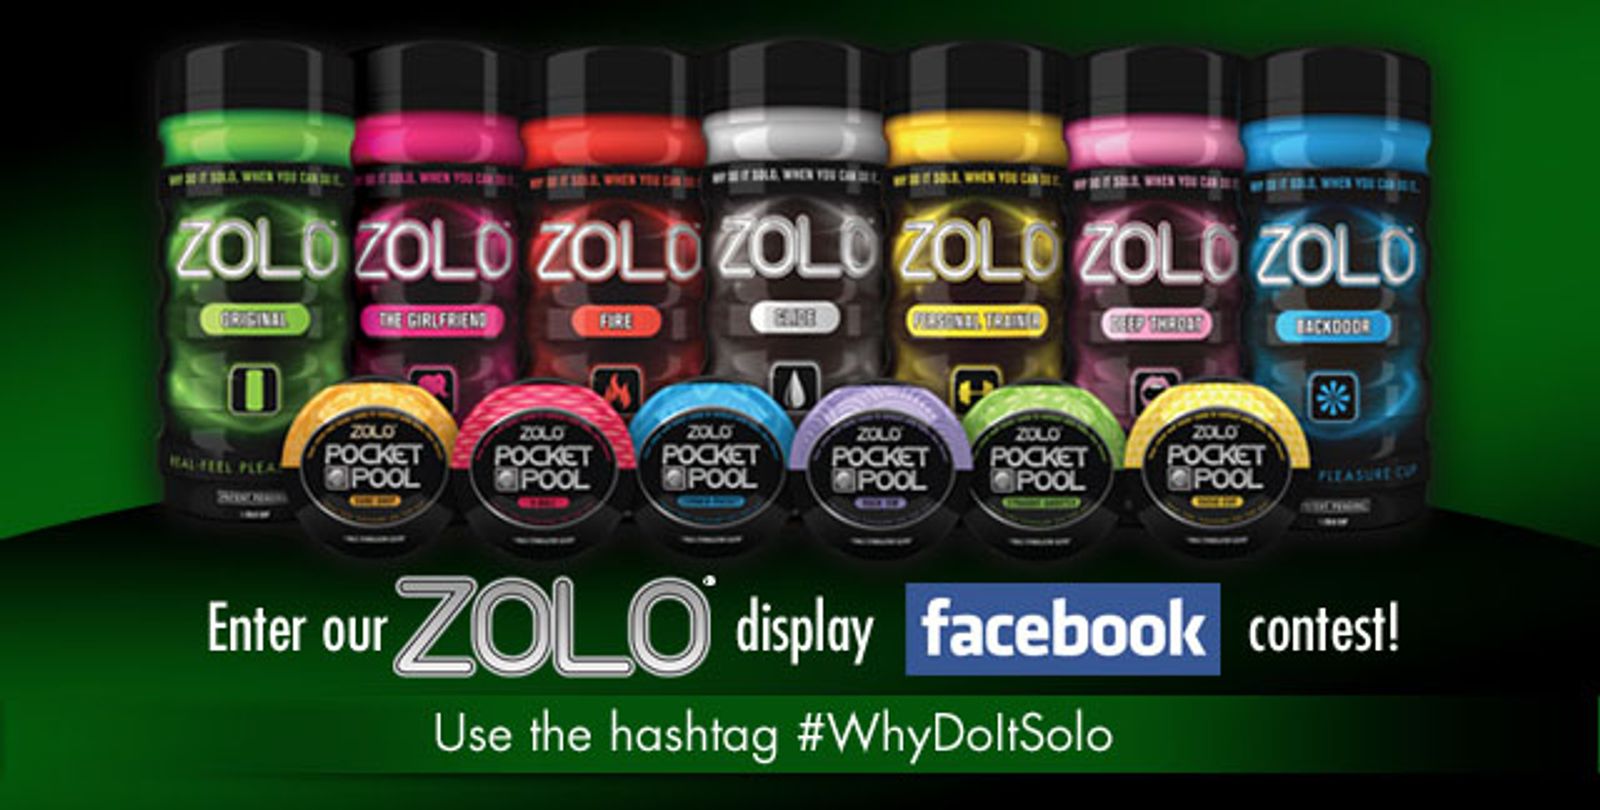 Adult Brand Concepts Sponsors Zolo Display Contest